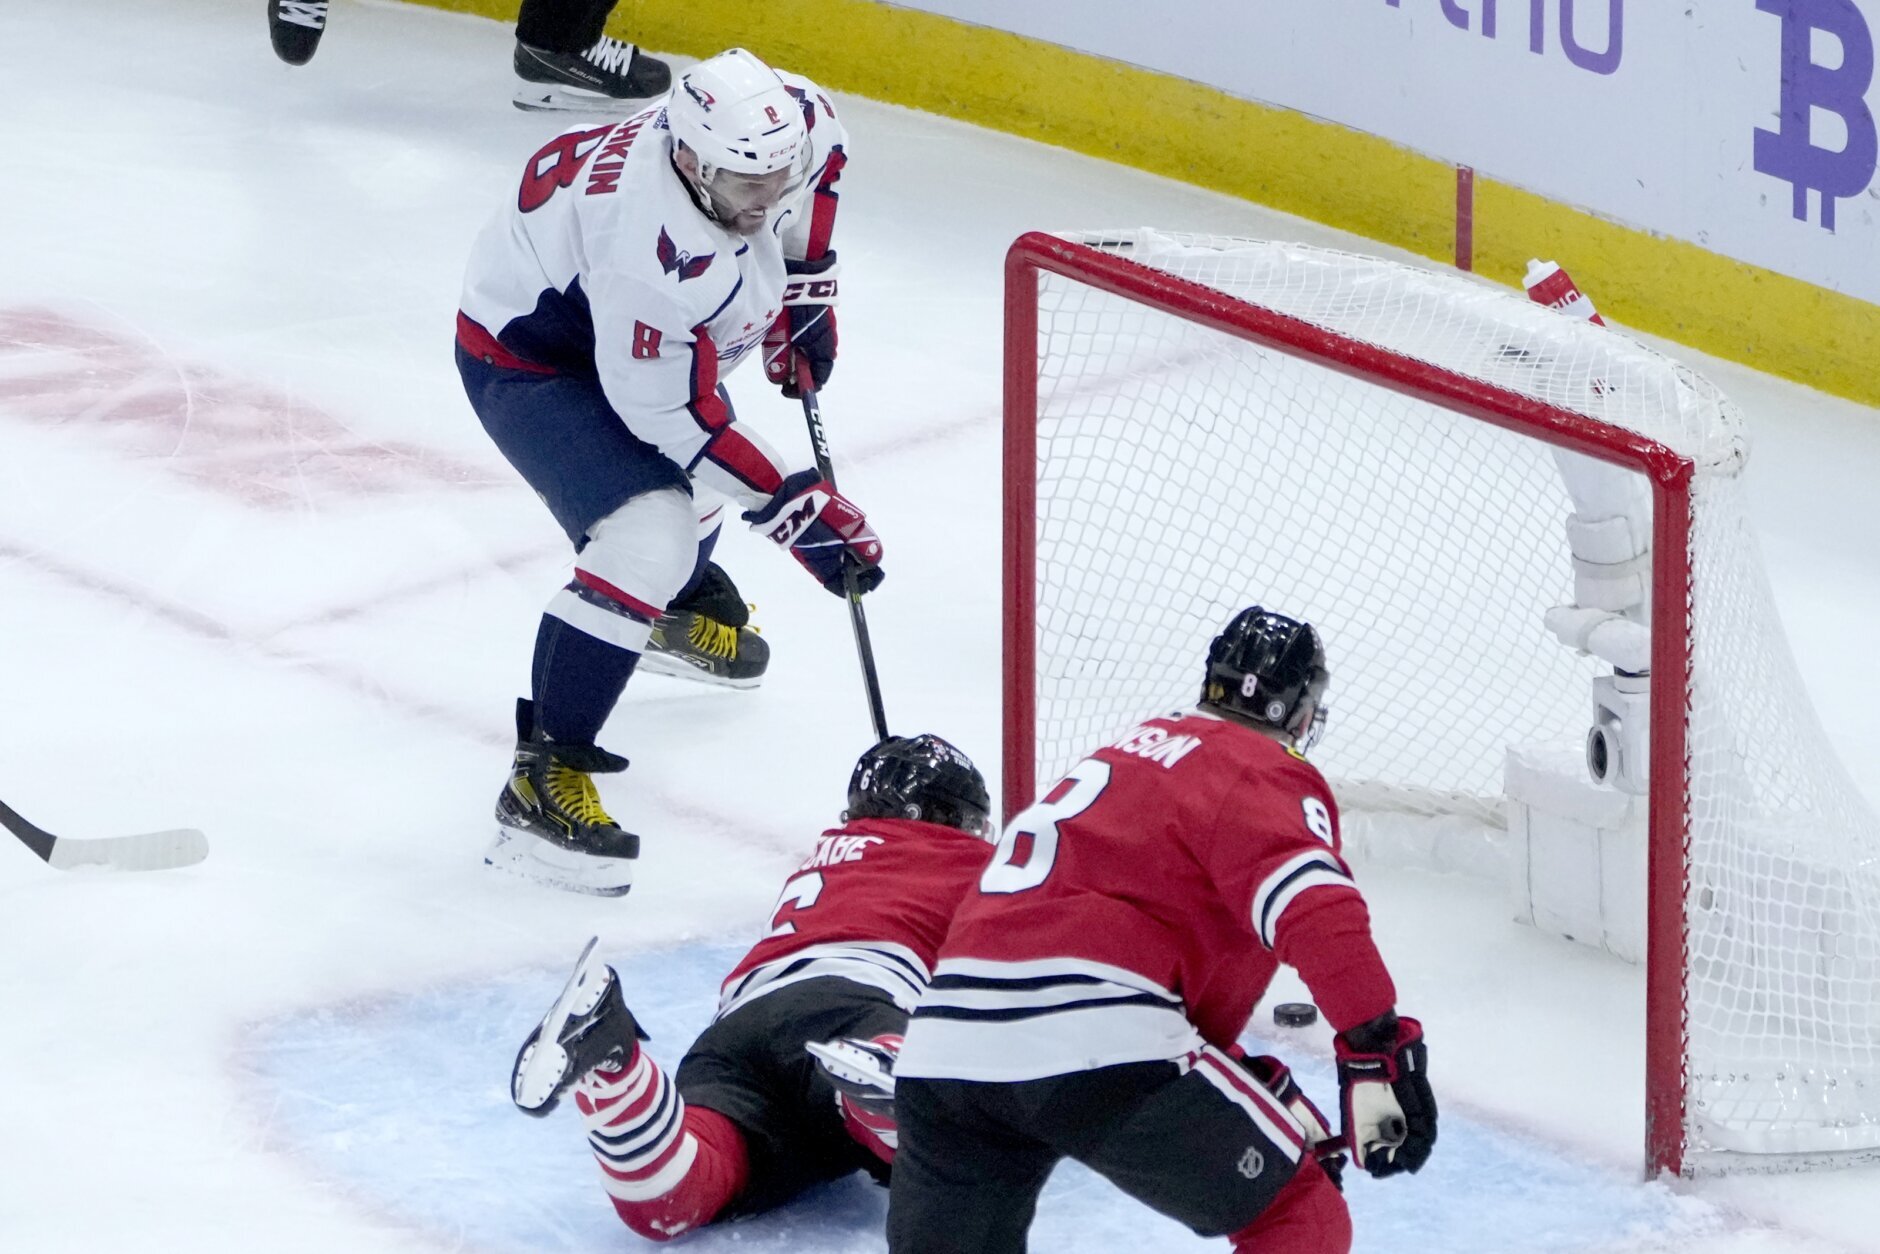 Capitals' star Alex Ovechkin achieves 800 career goals - The